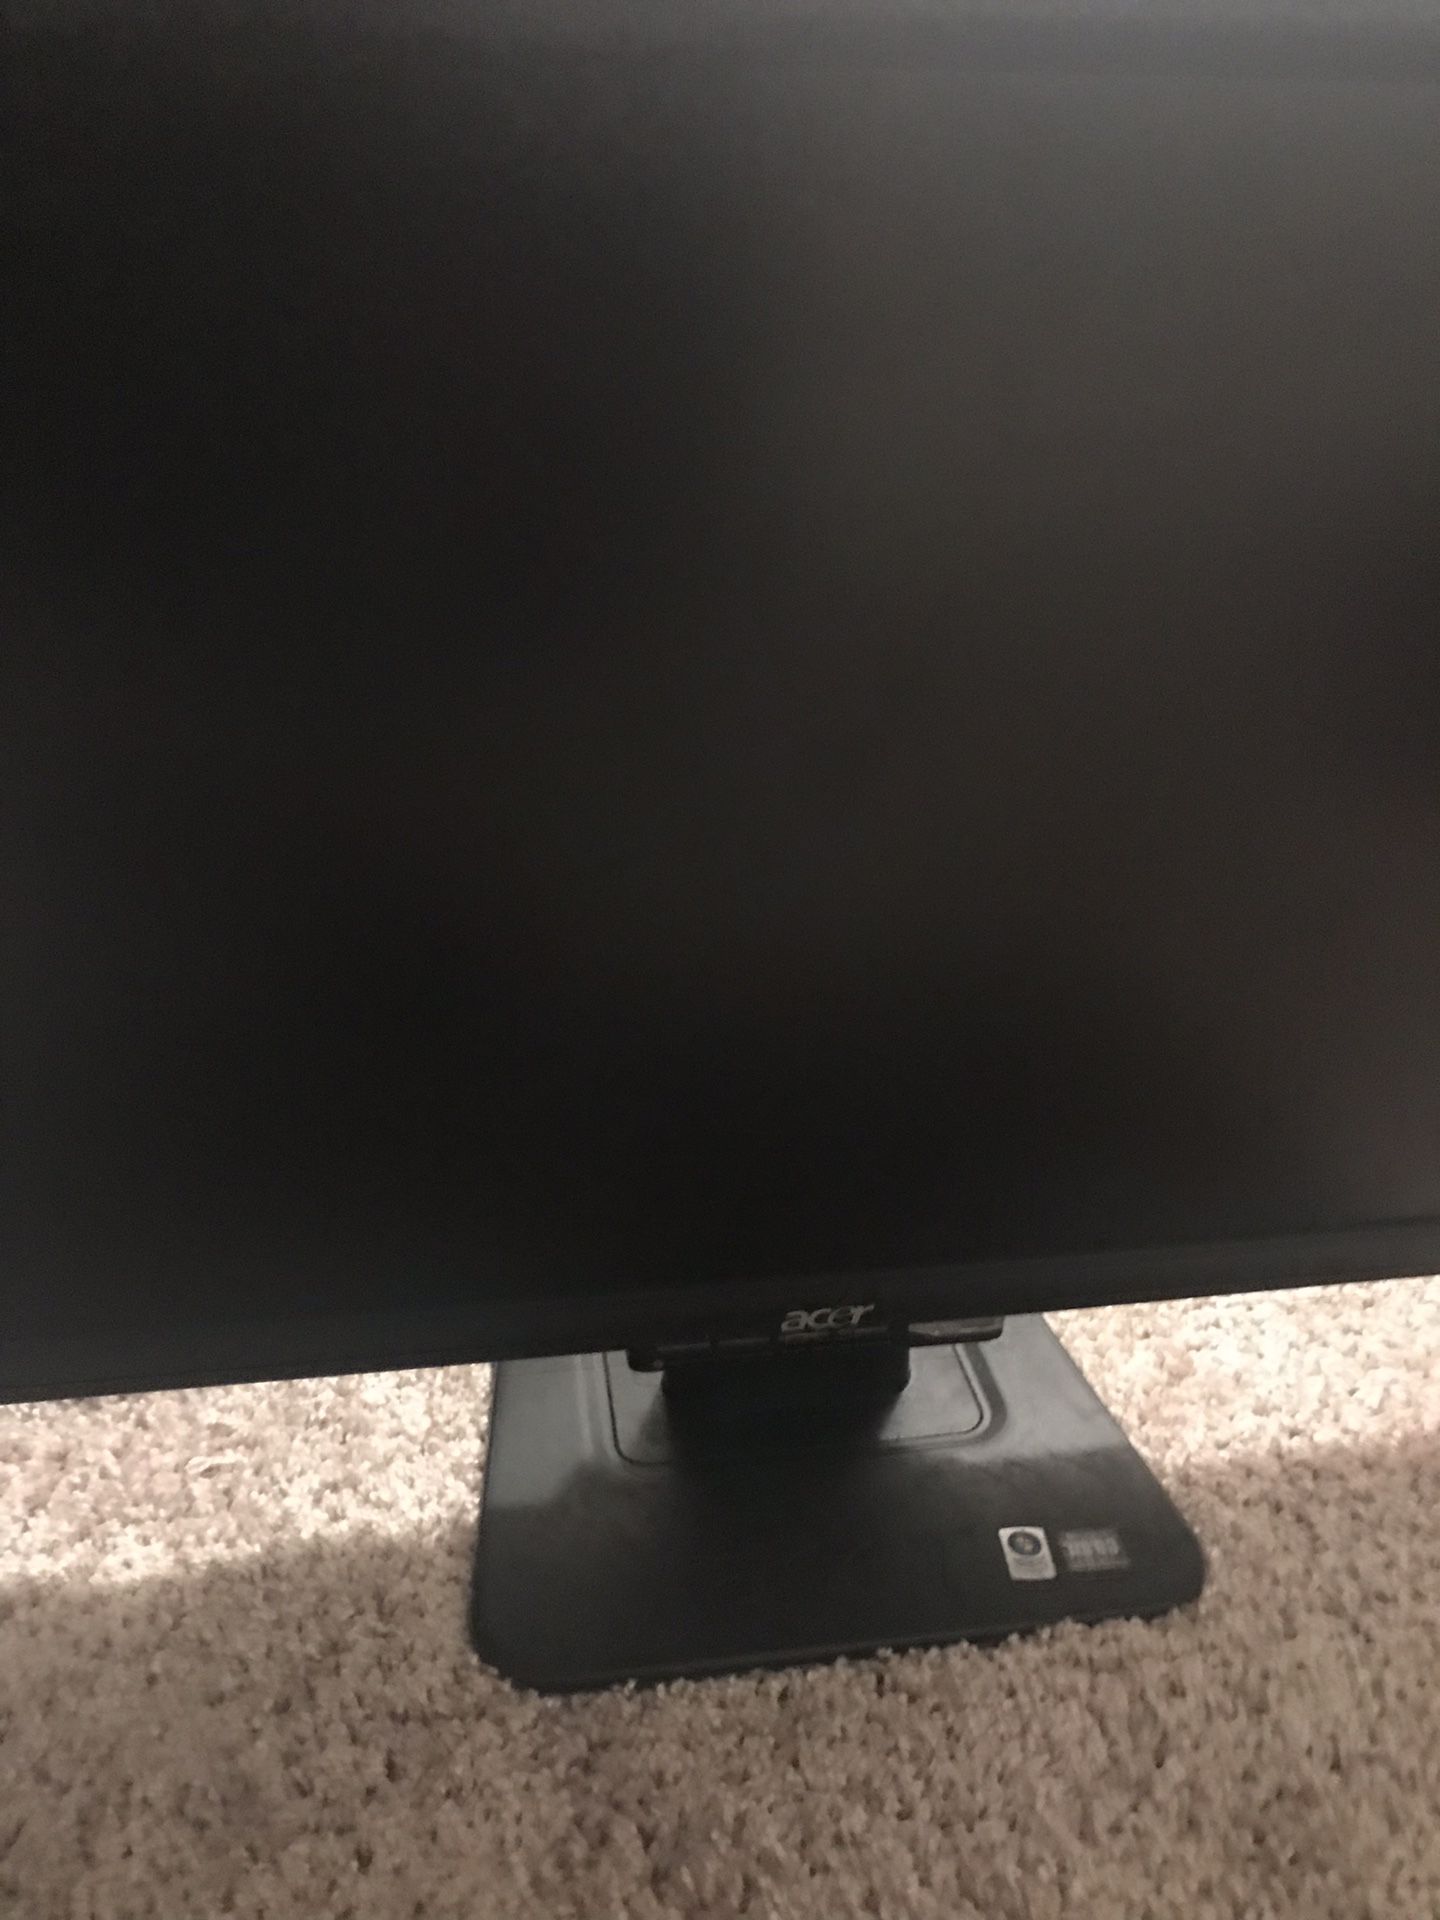 Acer monitor computer, like new 22 inches